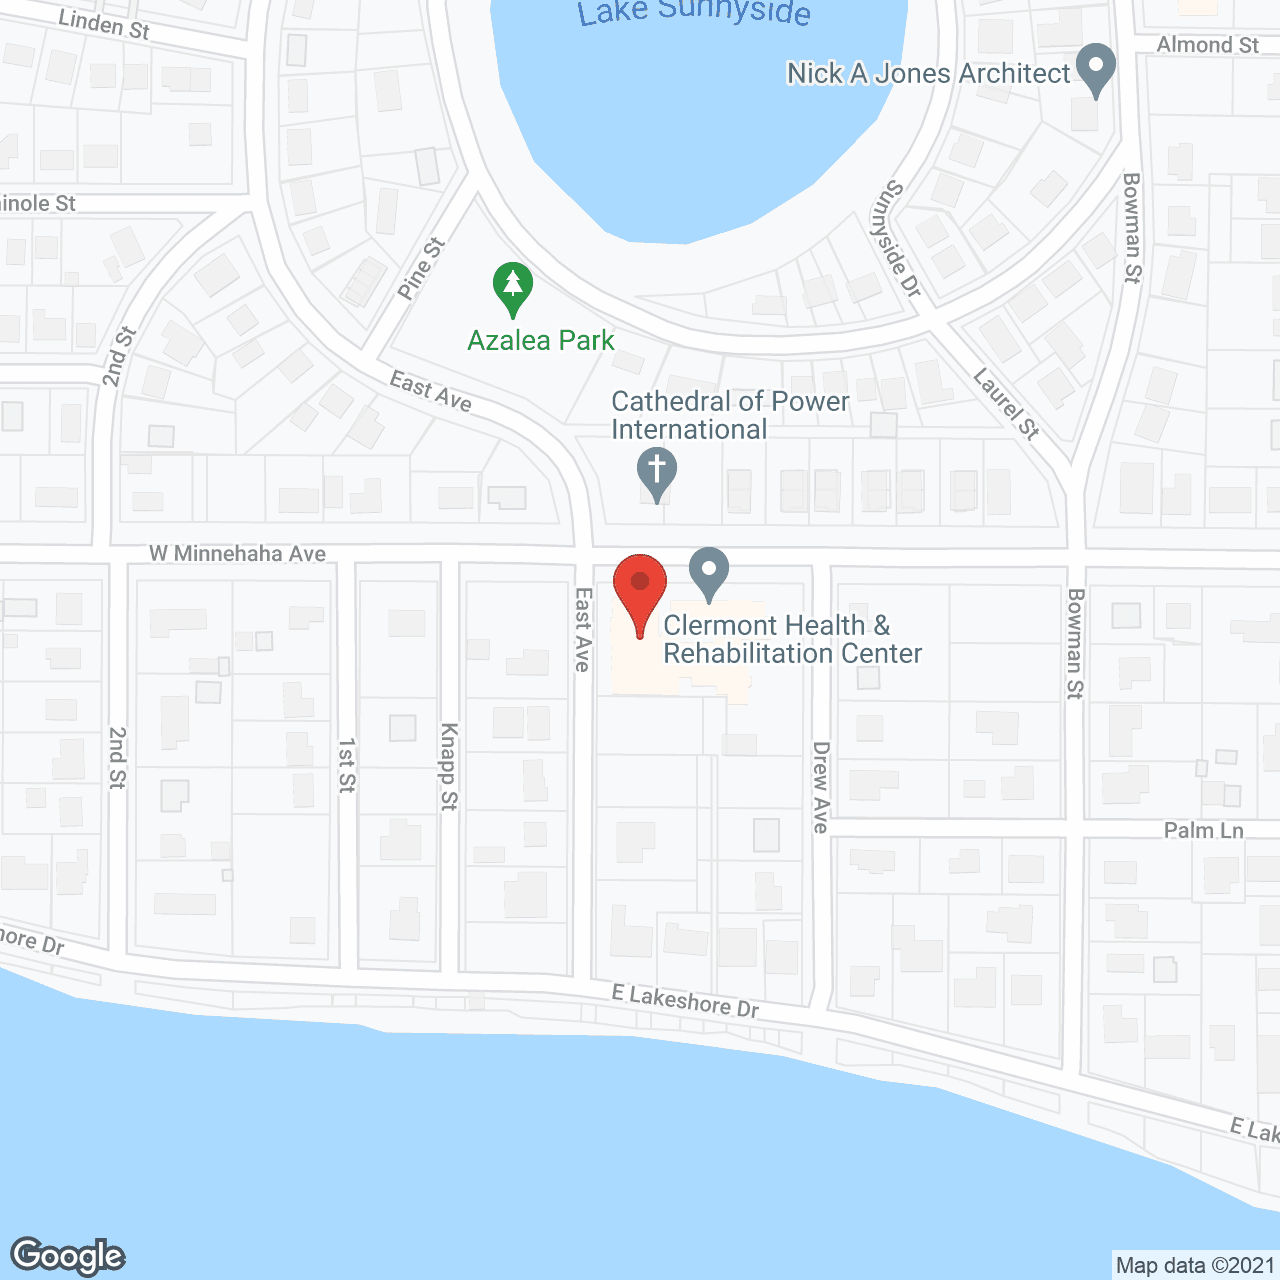 Clermont Health & Rehabilitation Center in google map